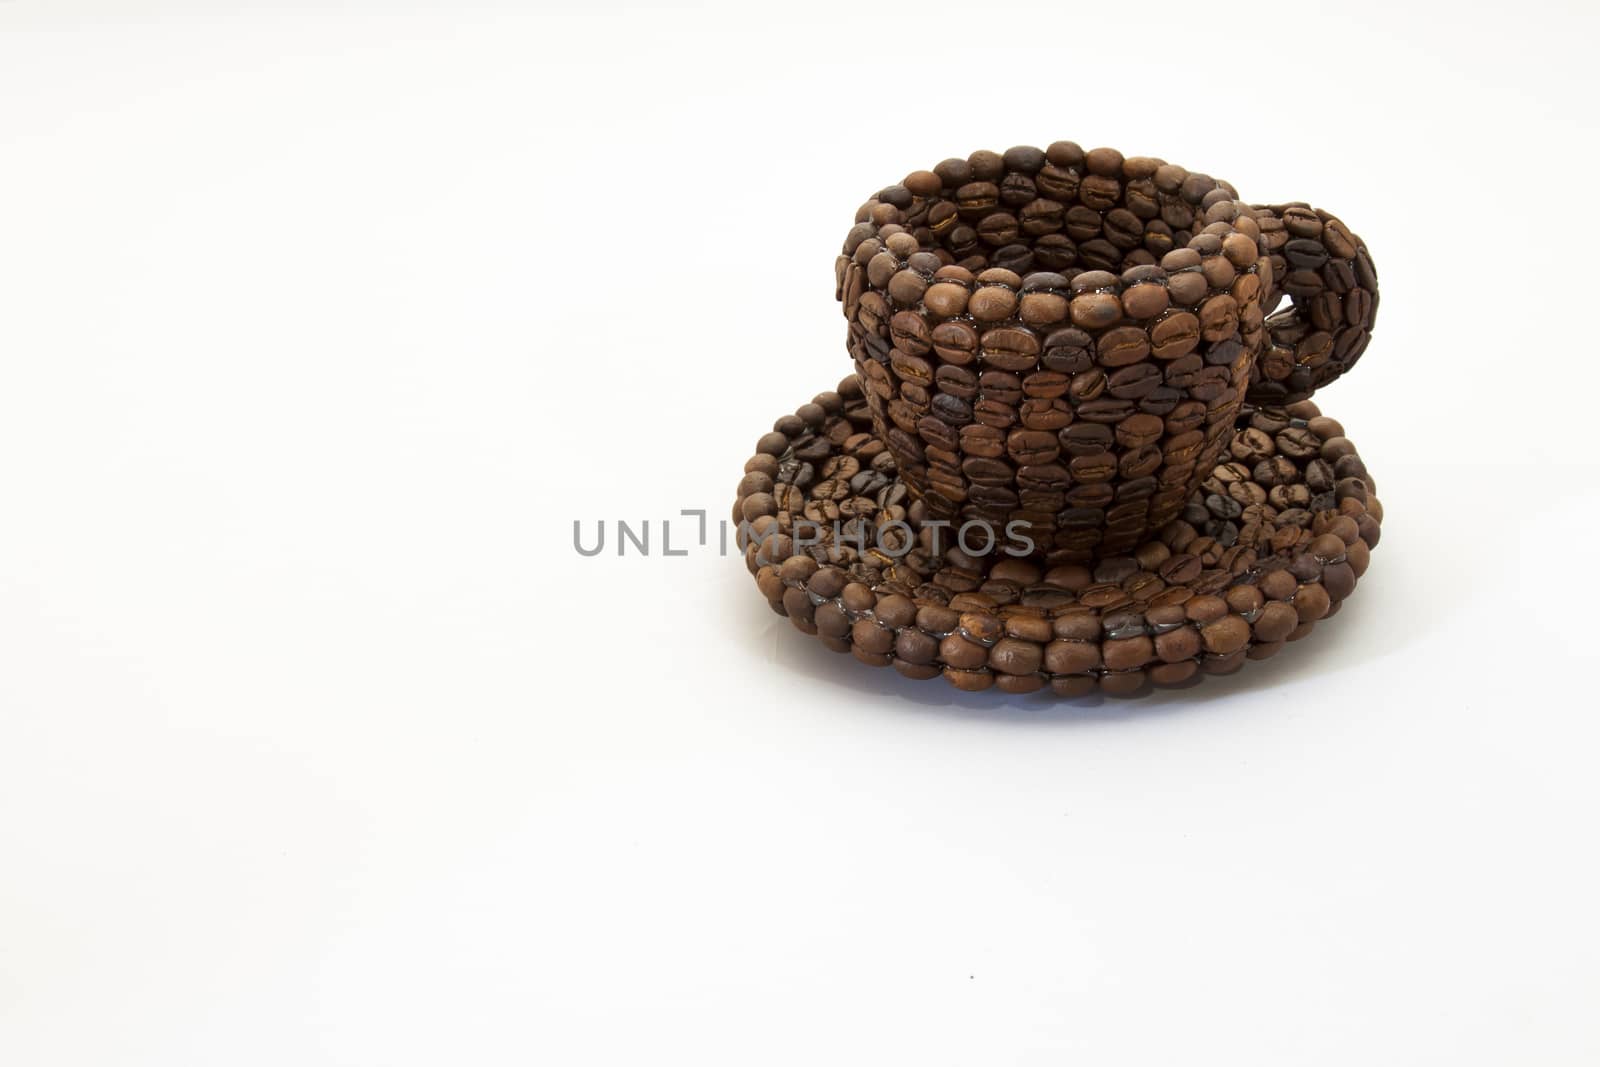 Close up view of a cup covered with coffee beans and white background